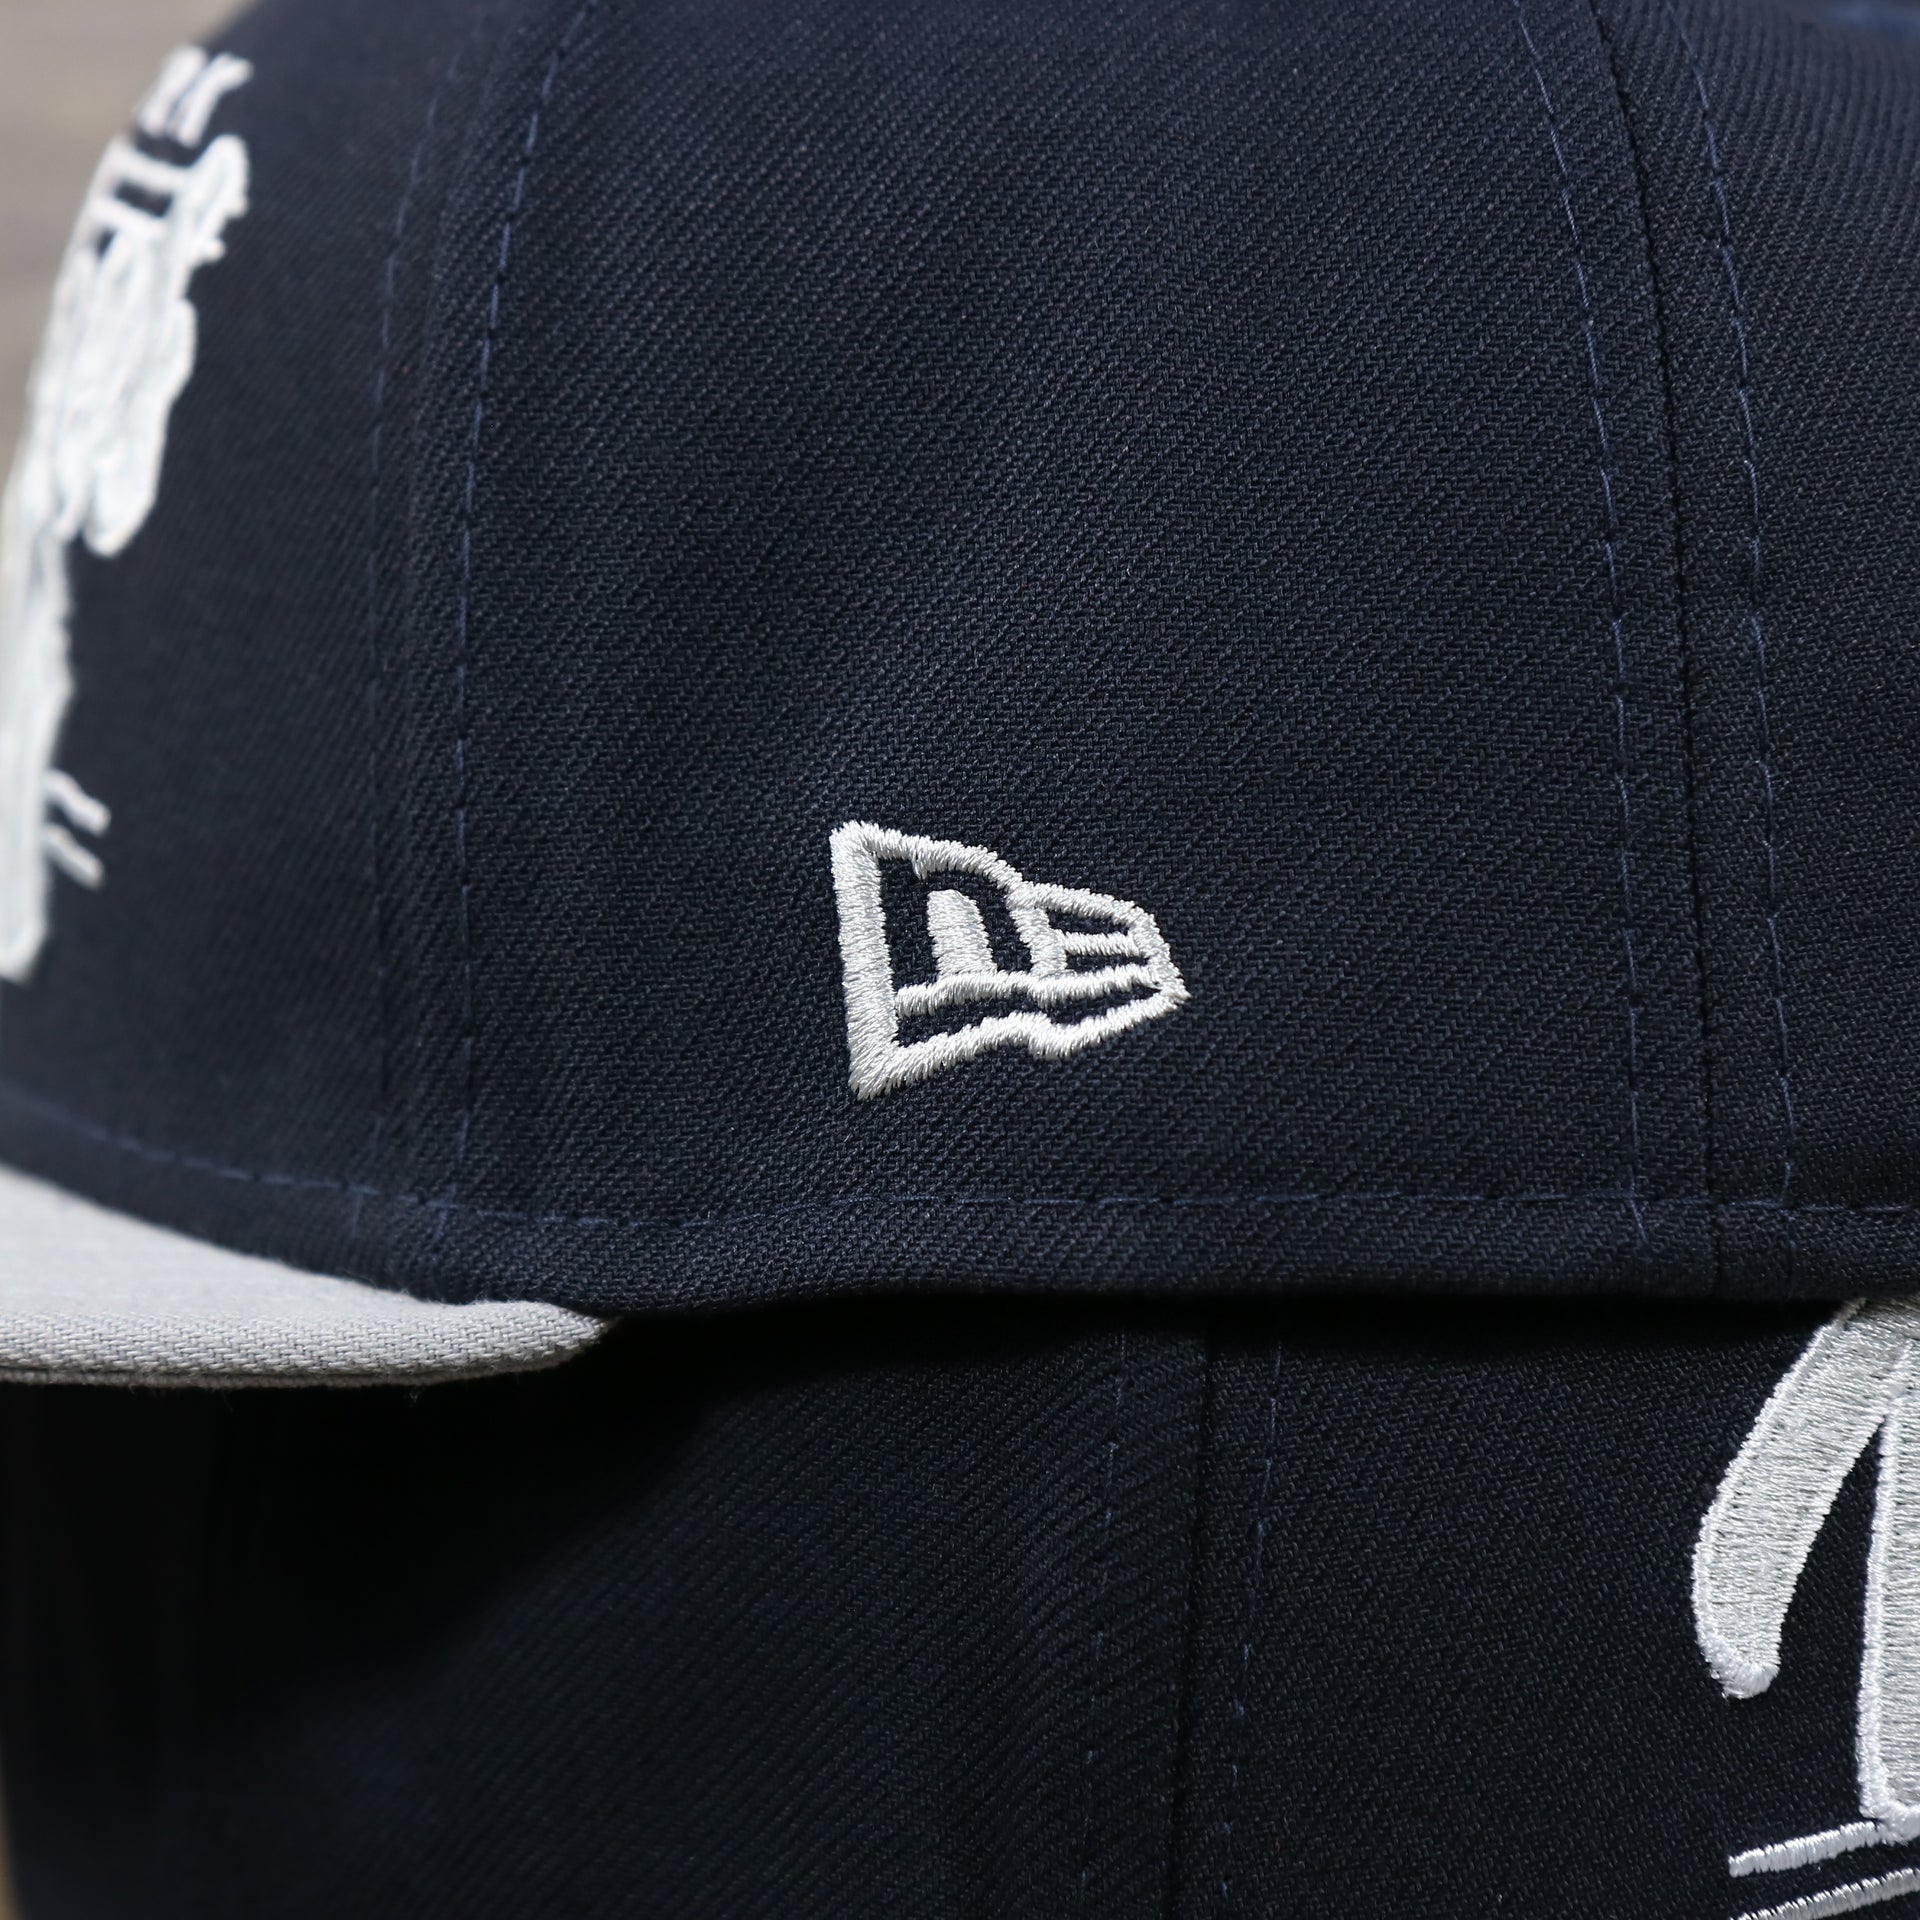 The New Era Logo on the New York Yankees "Team Script" College Bar Style 9Fifty Snapback Hat | Current Logo, Navy/Grey